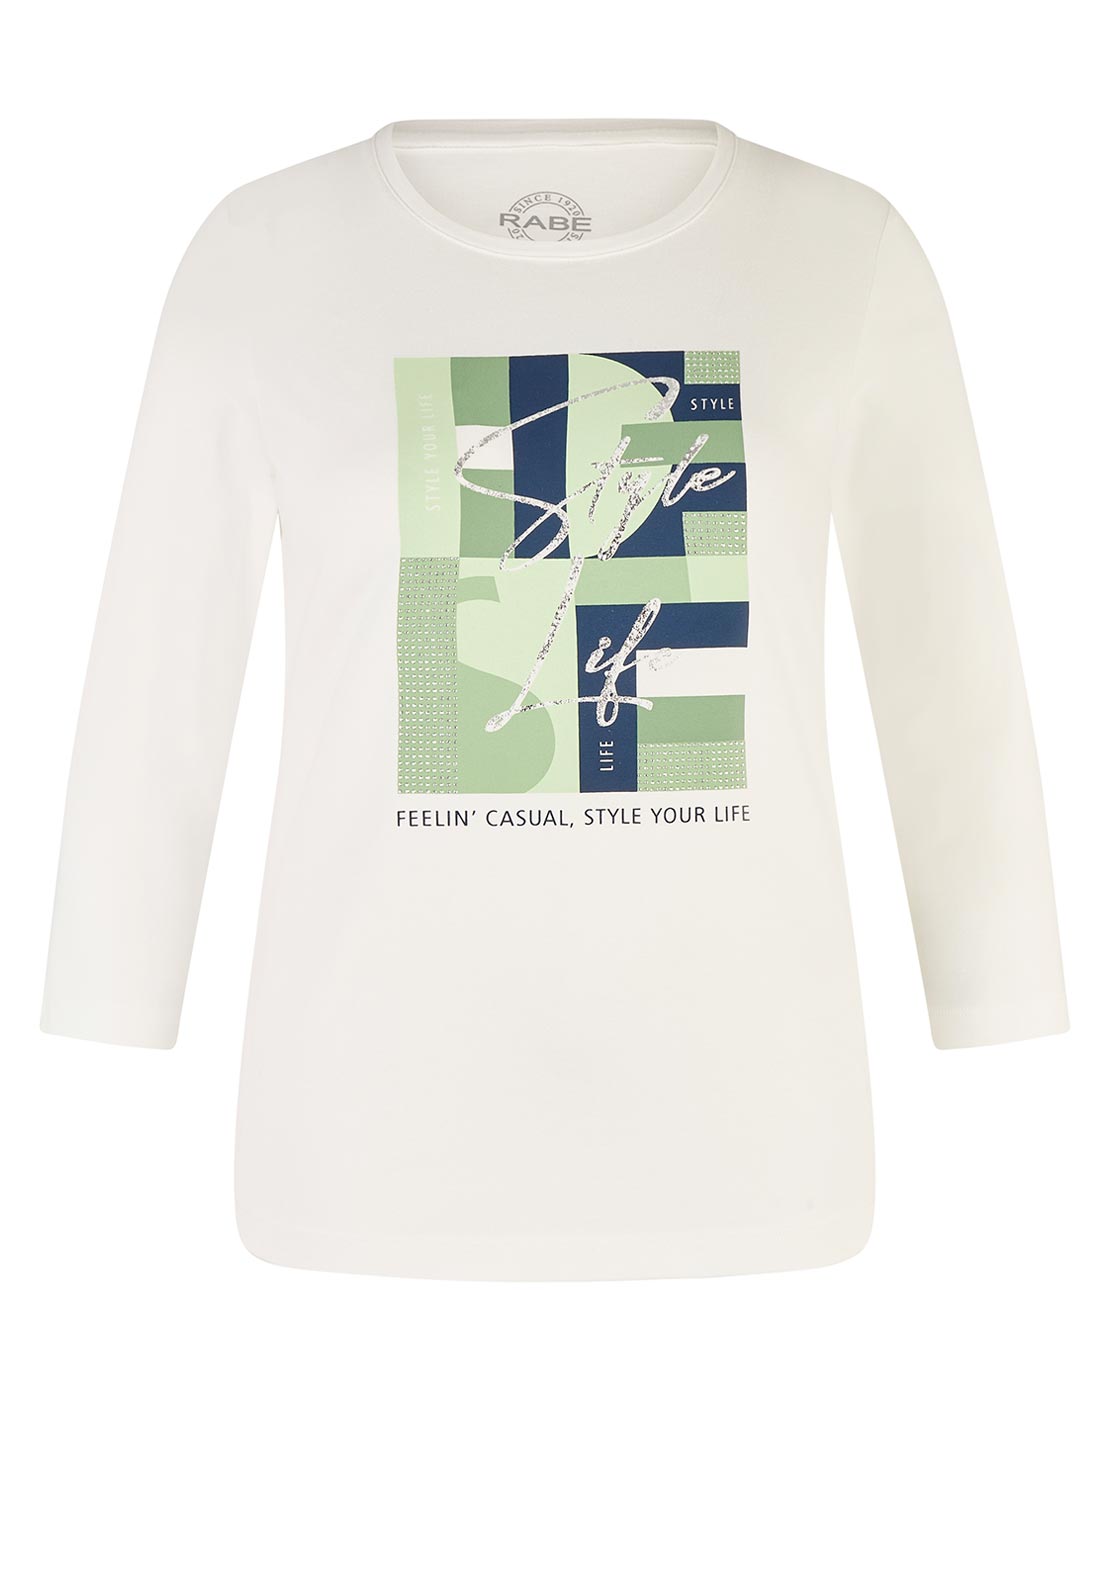 Rabe Style Your Life Graphic T-Shirt, Off White - McElhinneys